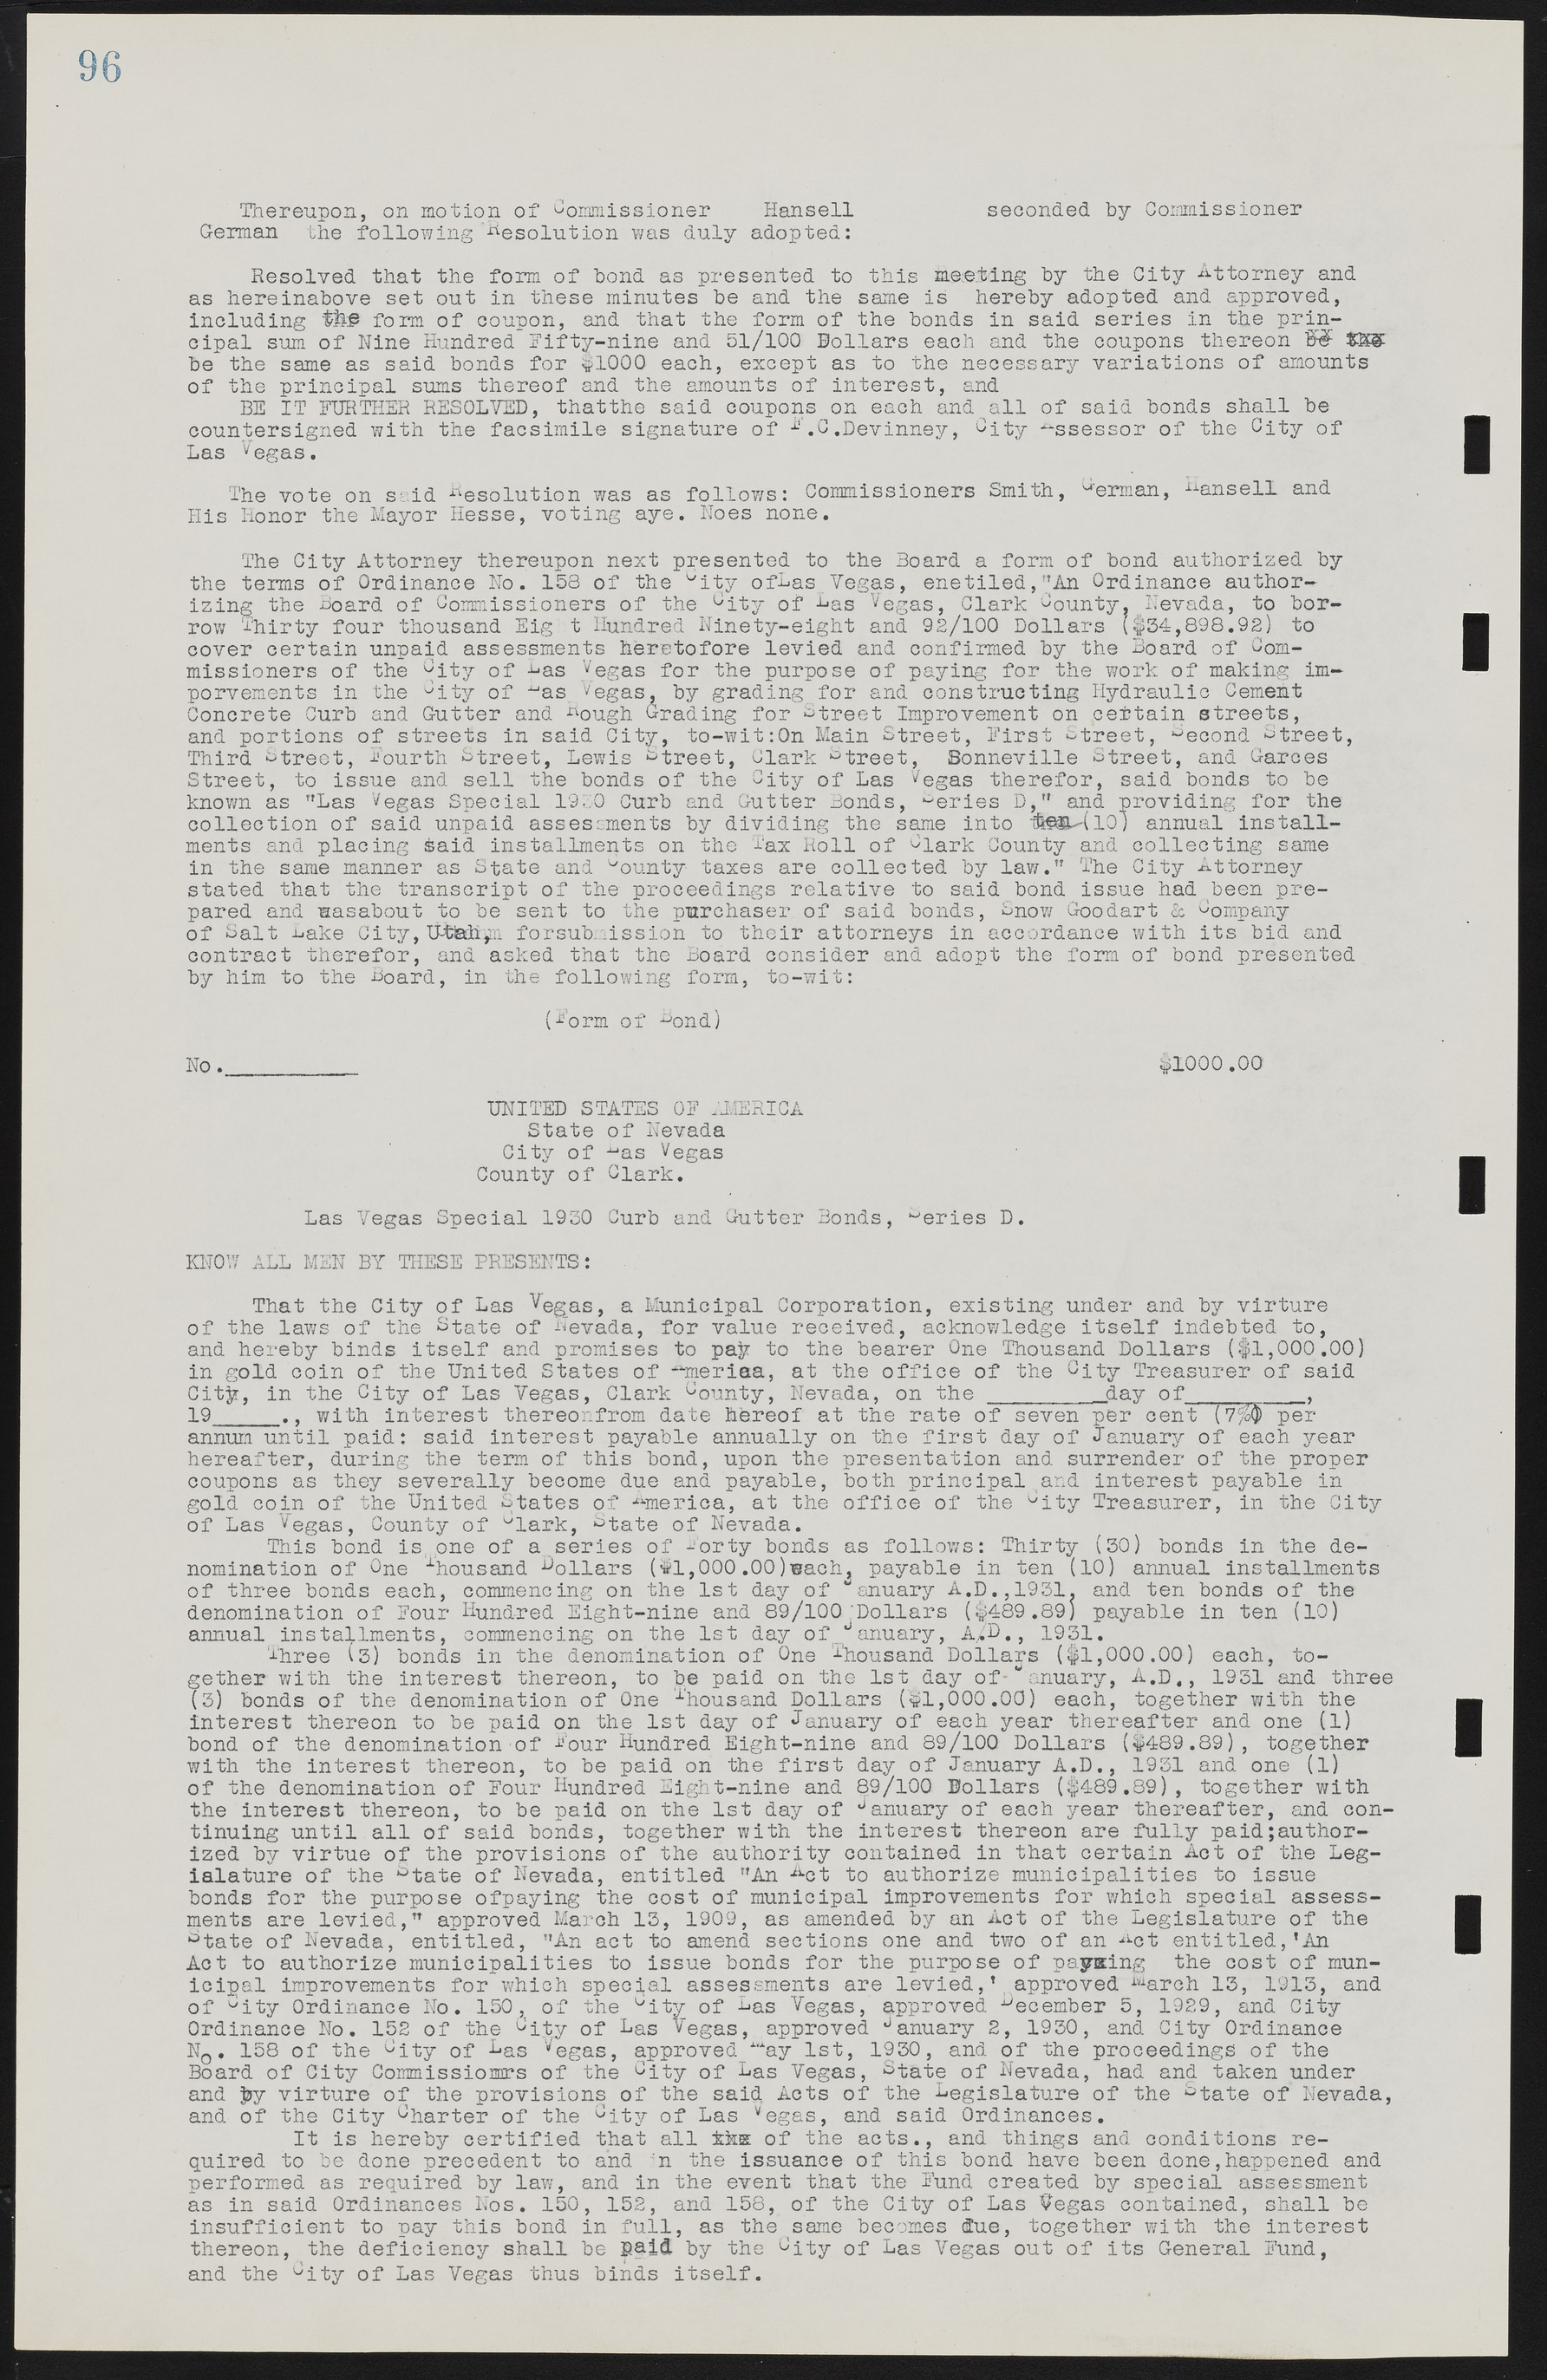 Las Vegas City Commission Minutes, May 14, 1929 to February 11, 1937, lvc000003-102